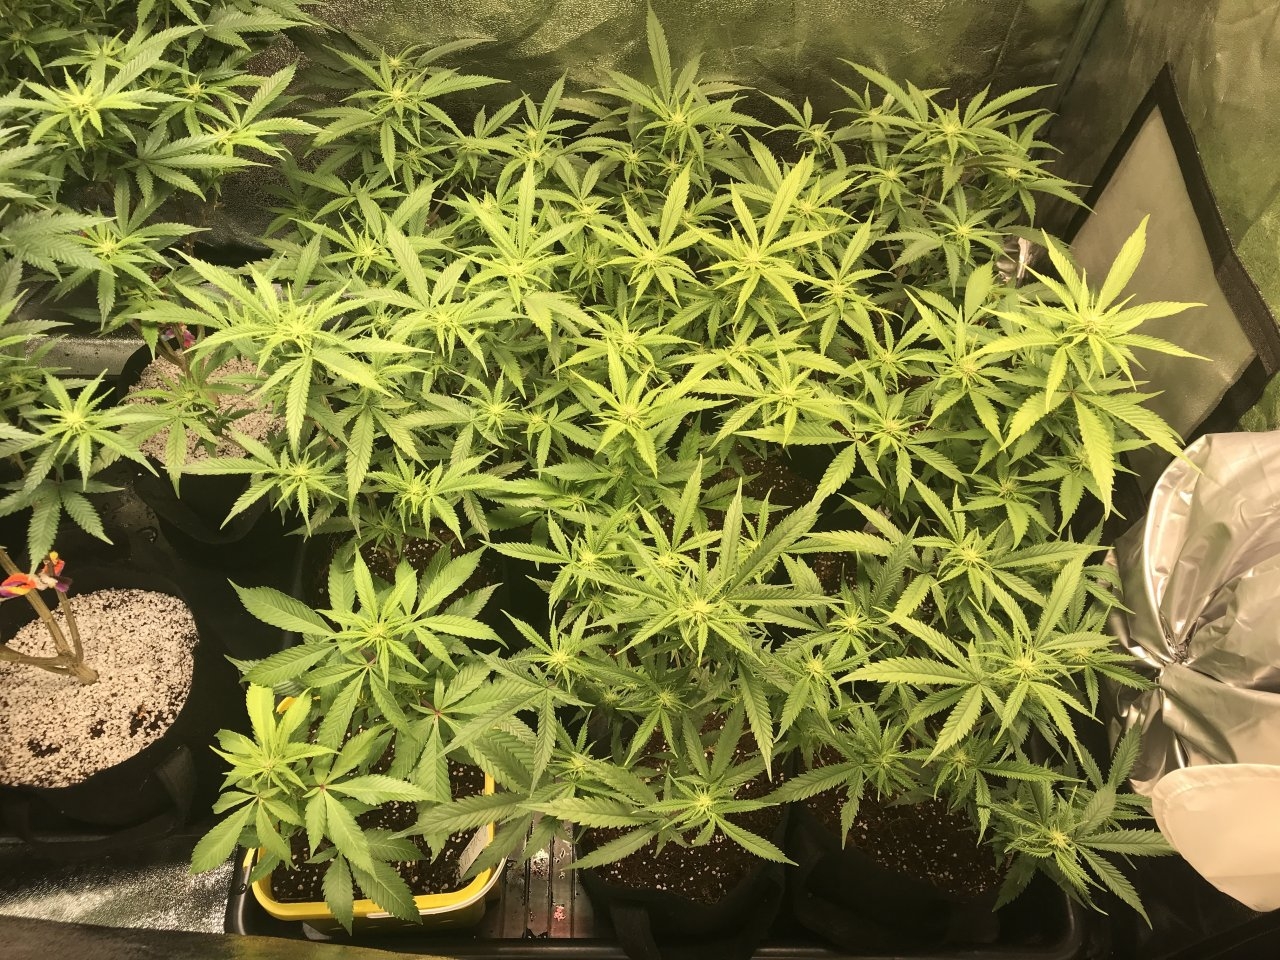 16th Day of 12:12 SOG side of the Grow 1.JPG